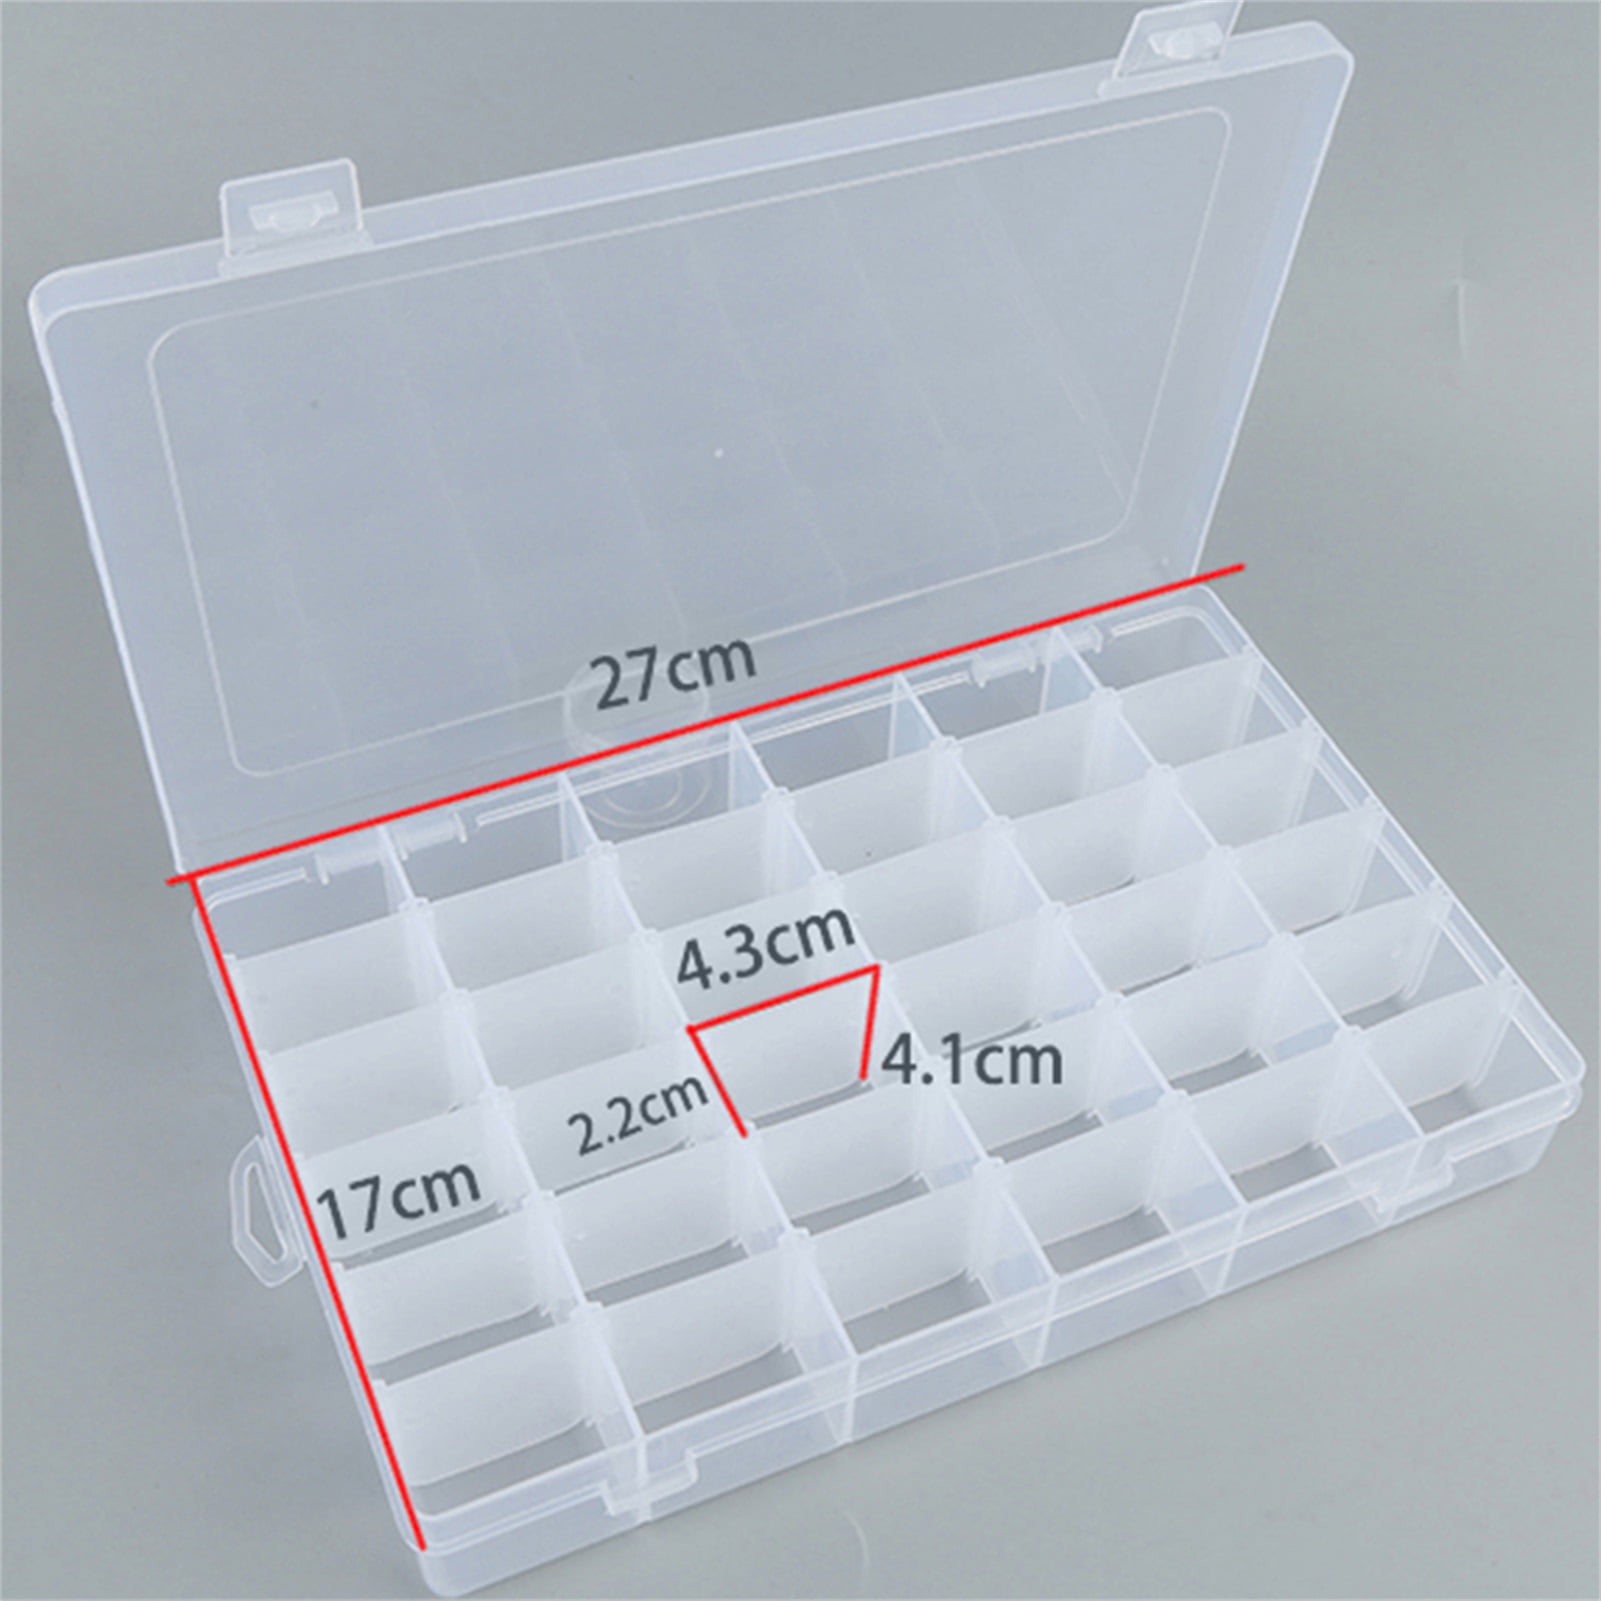 Outuxed 2Pack 36 Grids Clear Plastic Organizer Box Storage Container Jewelry Box with Adjustable Dividers for Beads Art DIY Crafts Jewelry Fishing